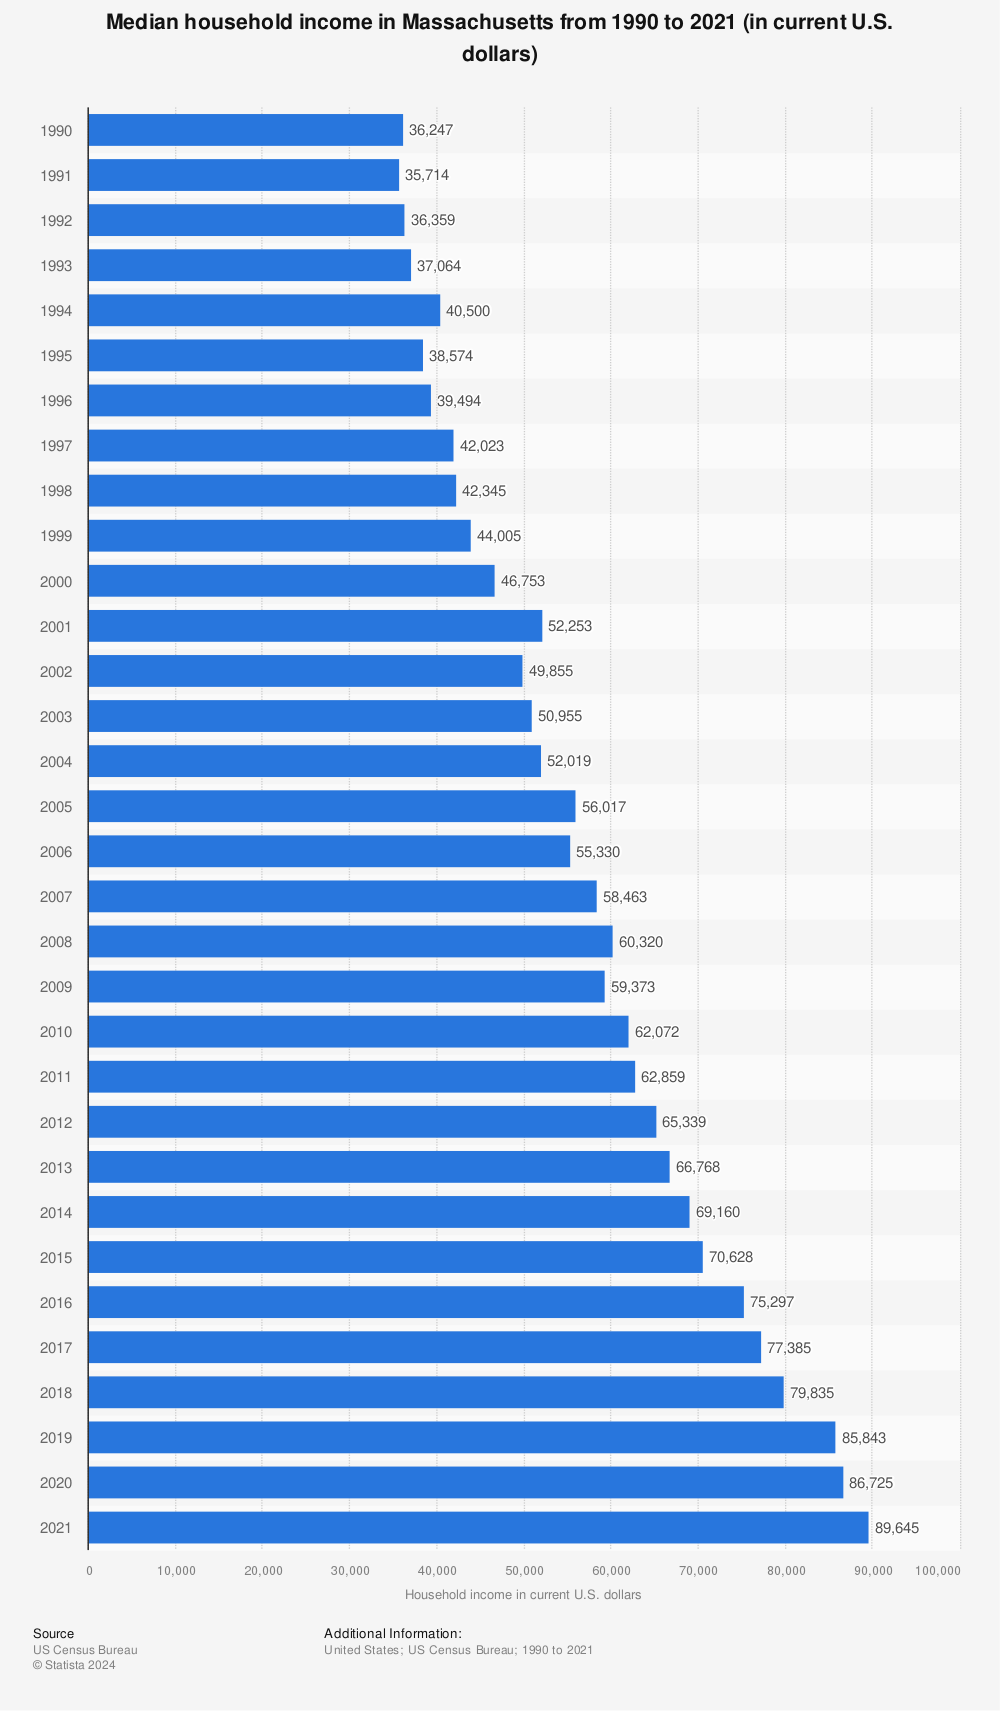 Statistic: Median household income in Massachusetts from 1990 to 2021 (in current U.S. dollars) | Statista